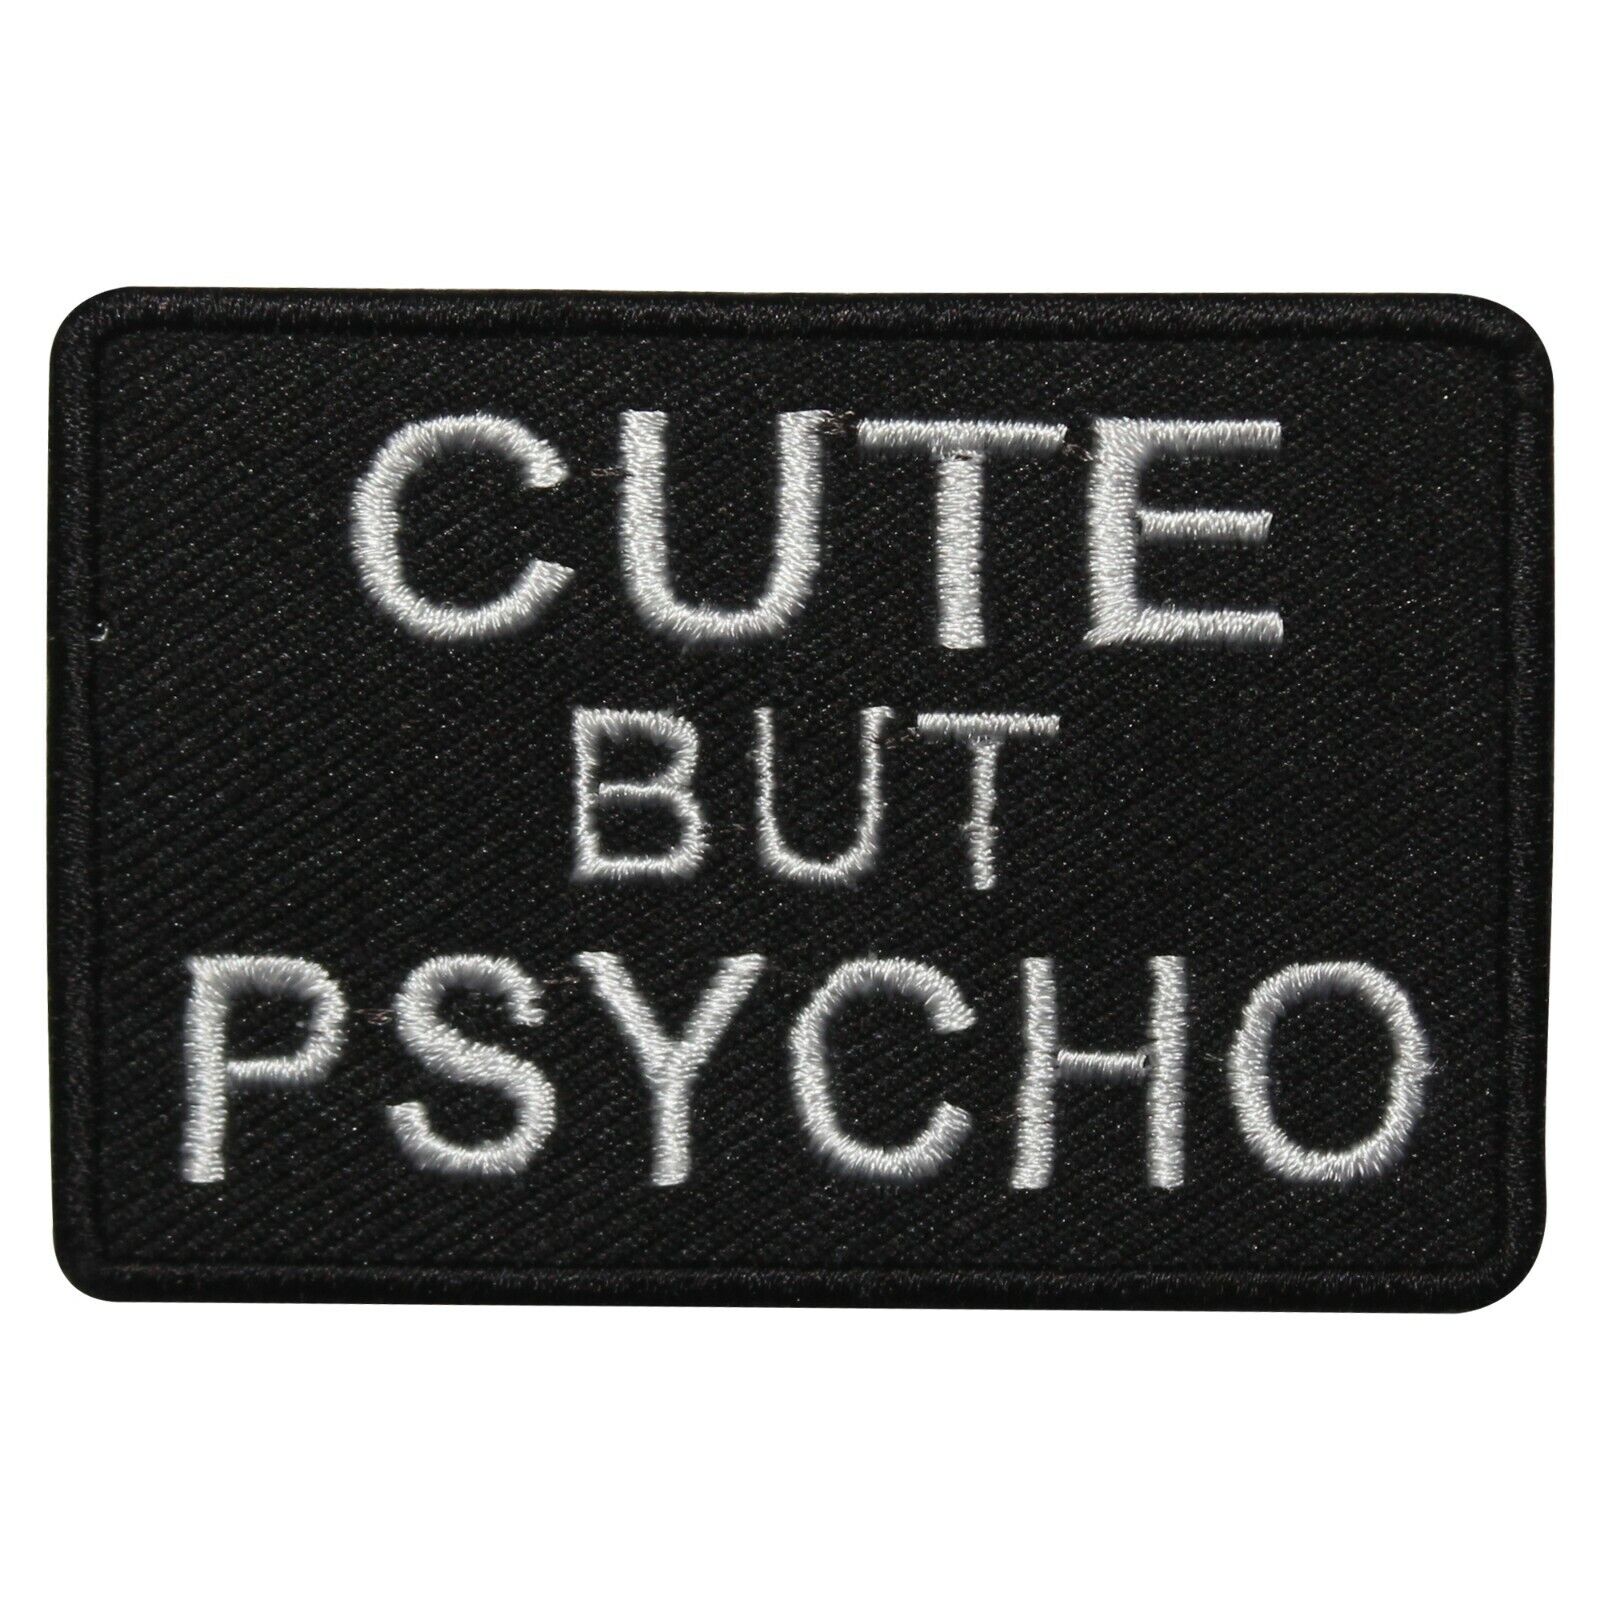 Cute But Psycho Words Slogan Patch Iron On Sew On Badge Embroidered Patch 